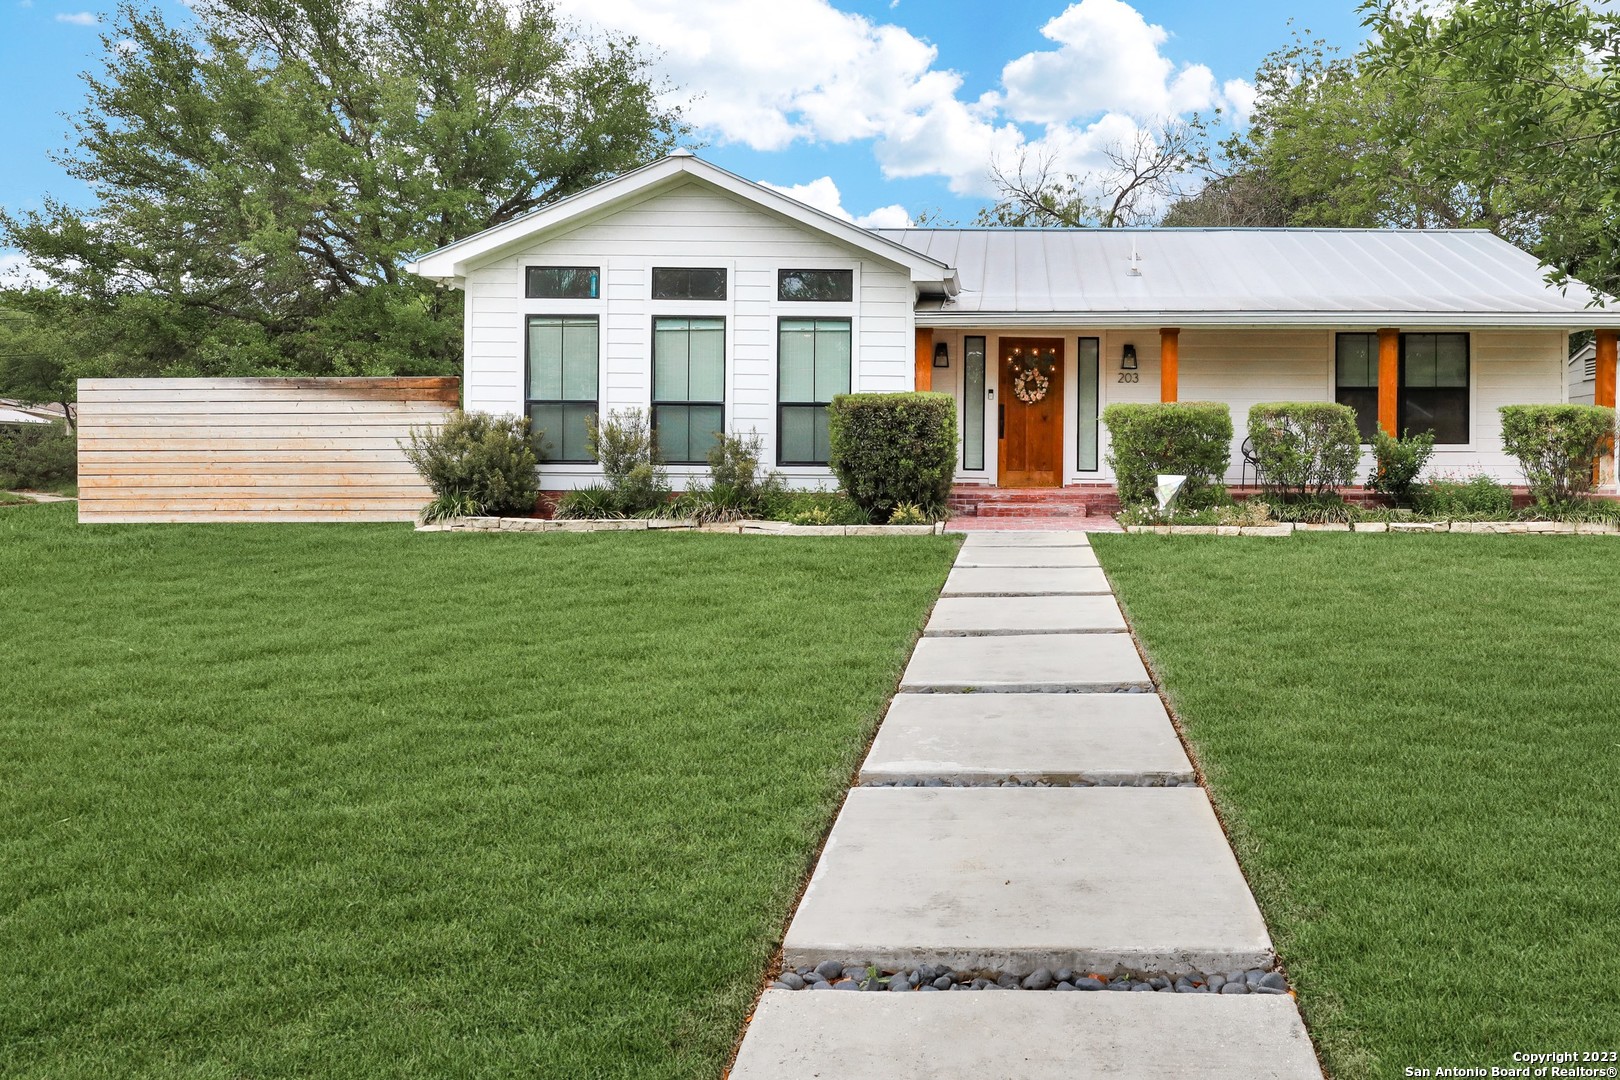 OPEN HOUSE Saturday 1-3pm. Beautiful Single Story on large corner lot in Alamo Heights Schools! Home was rebuilt in 2018 w/ a Modern Farmhouse design to include Light Wood Floors throughout, High Ceilings w/ Wood Beam, Custom Built-In's, Gas Fireplace & the perfect Open Floor Plan for entertaining! Gorgeous Chefs Kitchen features a Large Island, Breakfast Bar, Farmhouse Sink w/ Reverse Osmosis Filtration System, Wine Refrigerator, & GAS Cooking. XL Laundry Room w/ Custom Cabinets offering plenty of storage, Folding Station, & Mud Bench upon entry. Owner Suite w/ Outdoor Access, Luxury Bathroom w/ Separate Tub and XL Walk-in Shower w/ Rain Shower head, & Custom Designed Owner Closet. A true must see!